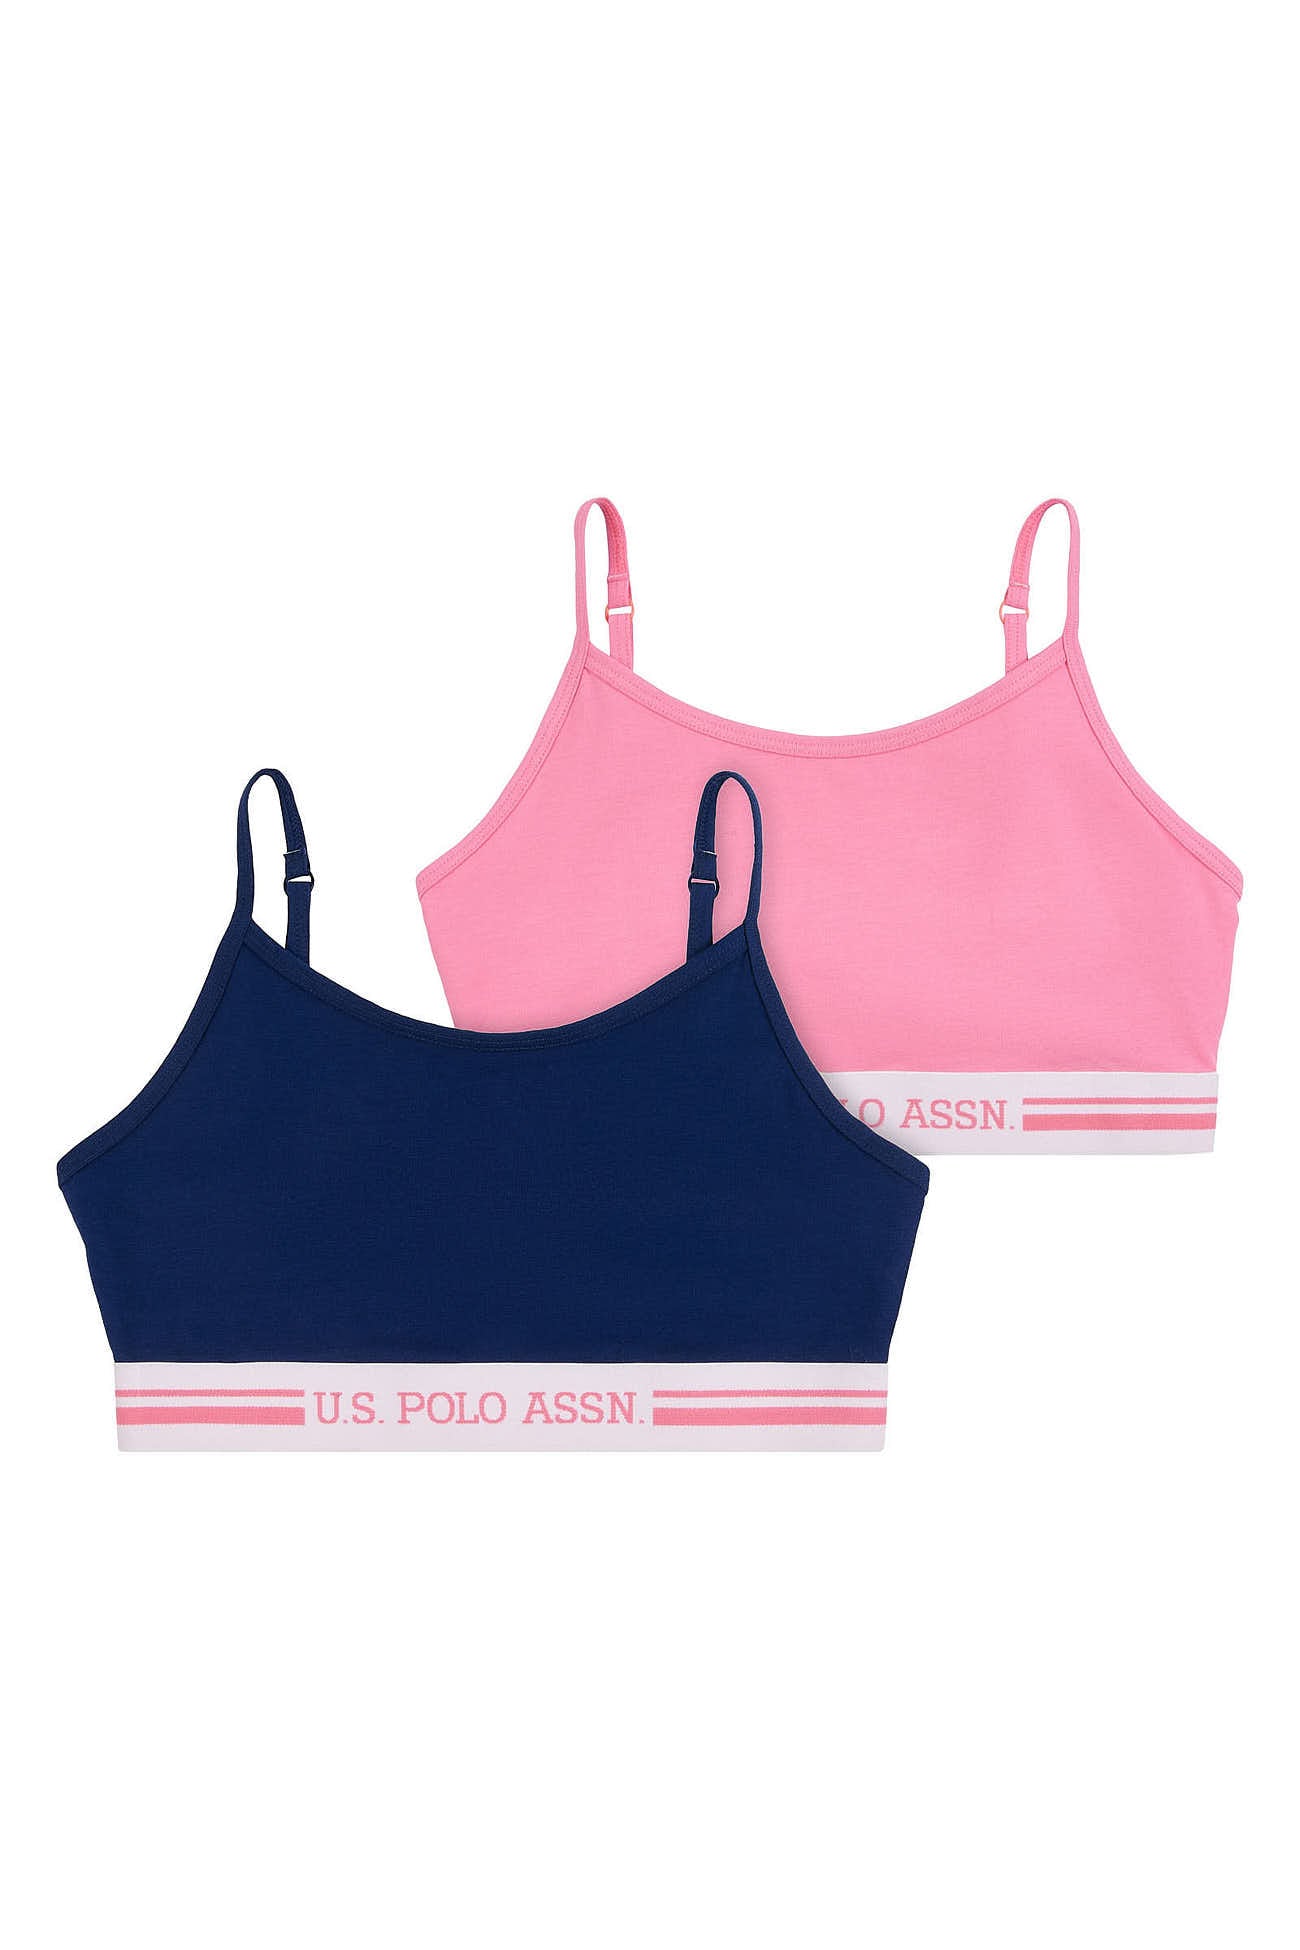 U.S. Polo Assn. Girls 2 Pack Bralettes in Medieval Blue